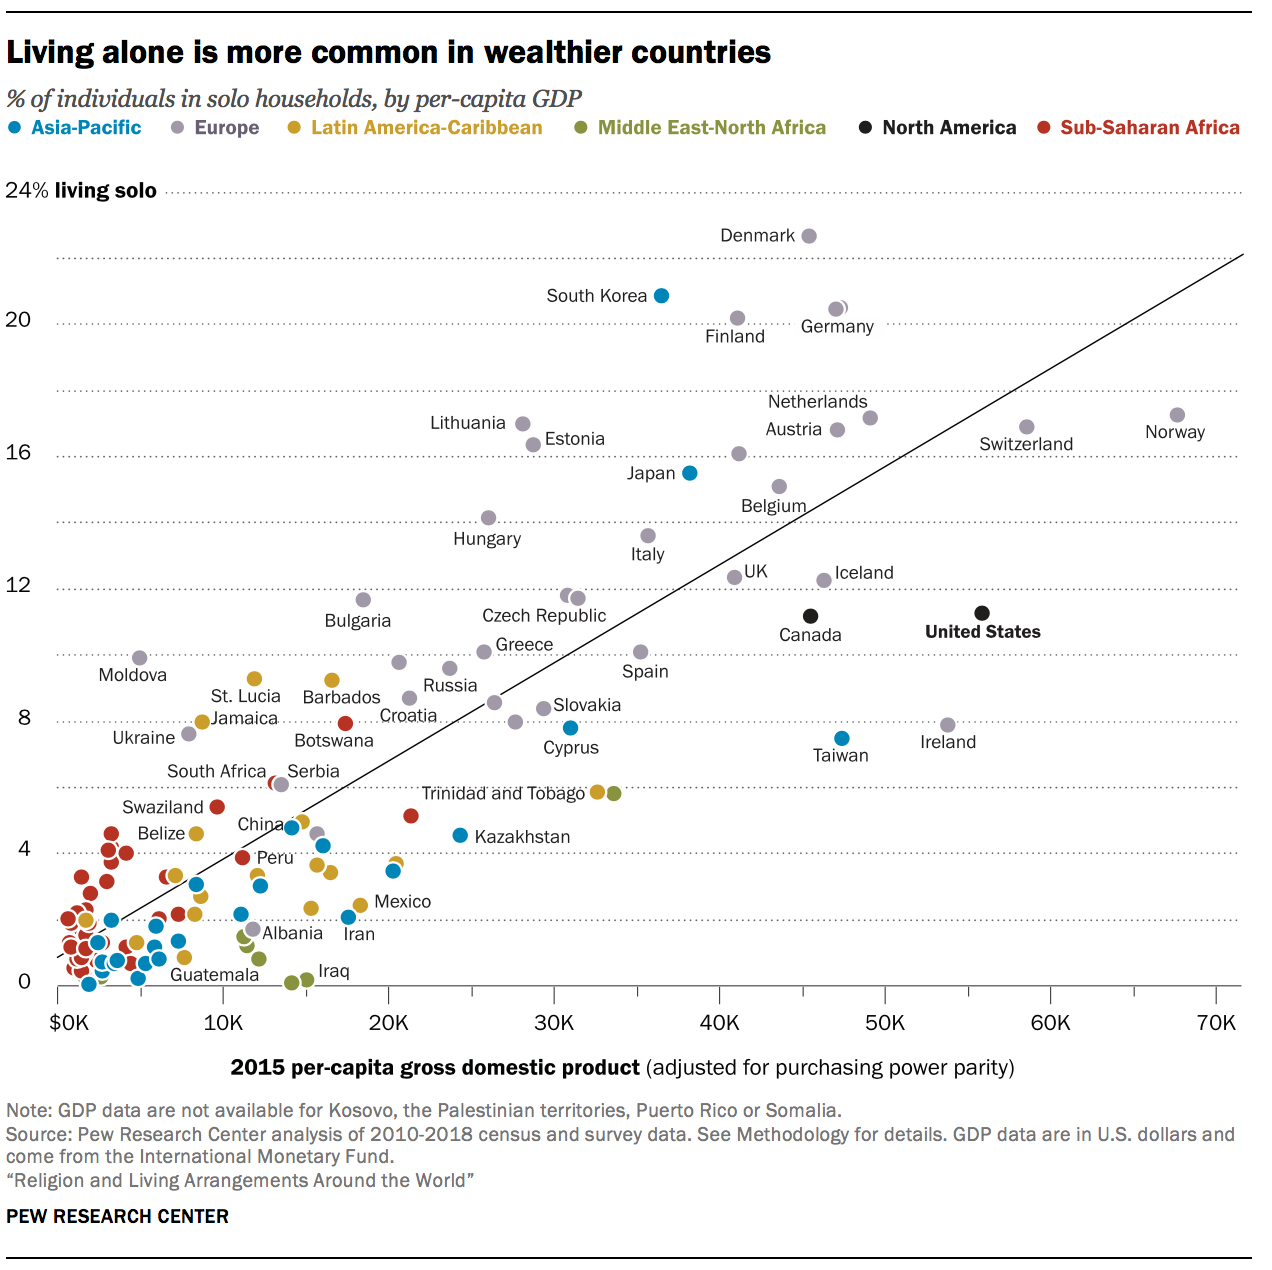 Living alone is more common in wealthier countries